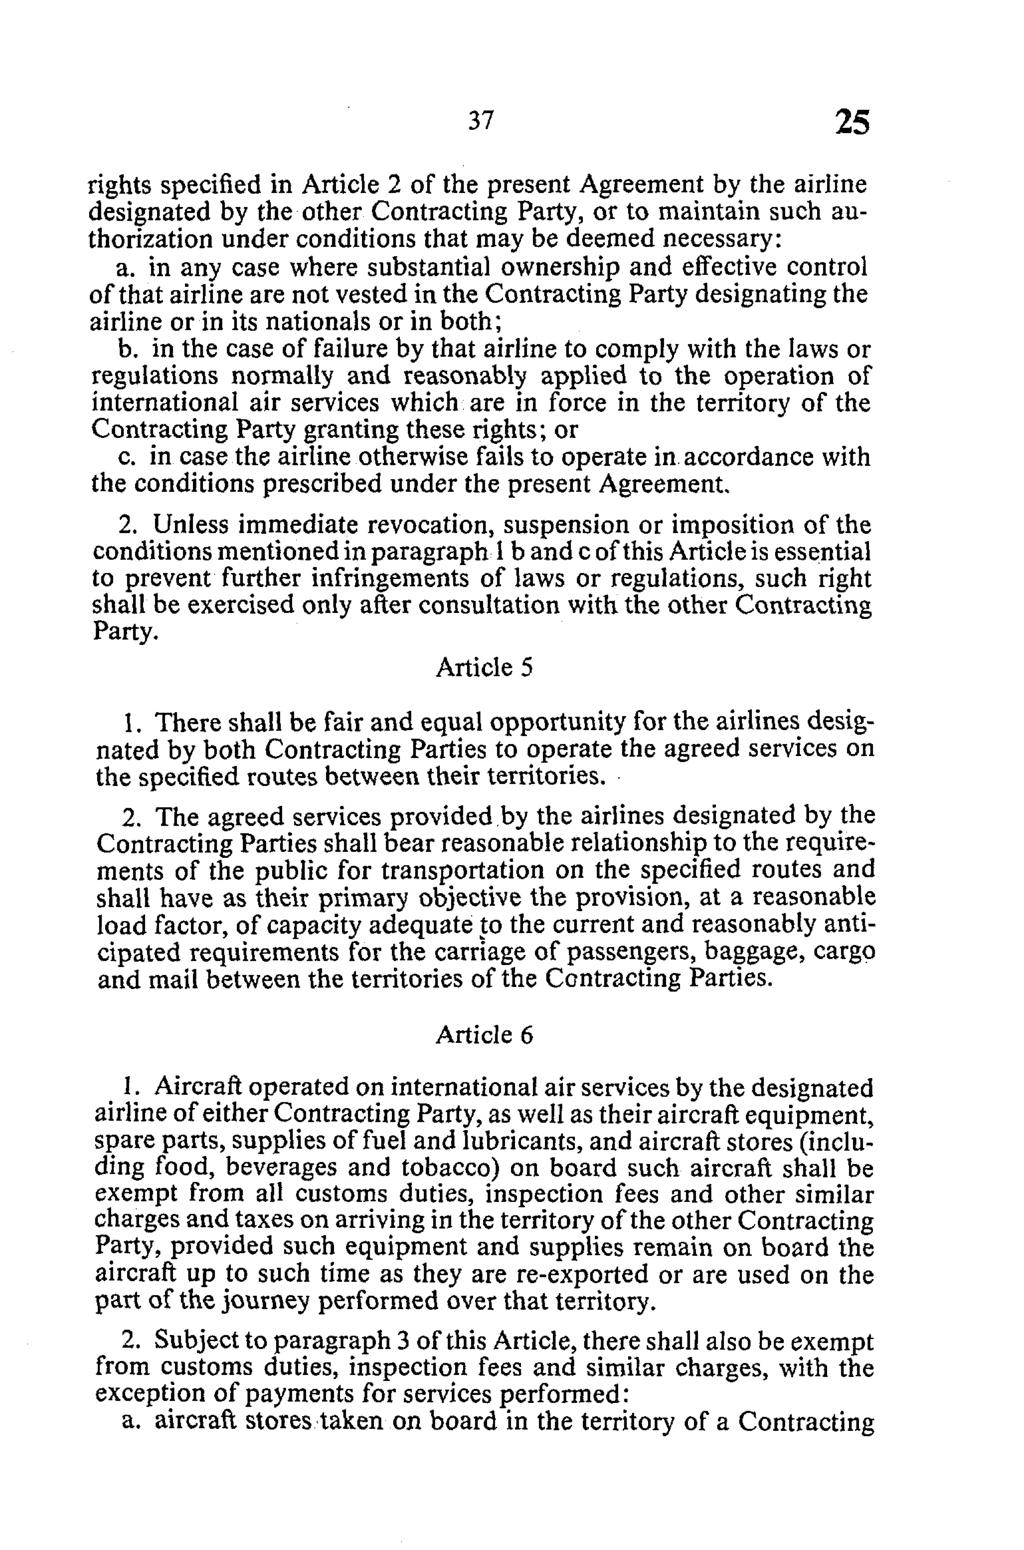 rights specified in Article 2 of the present Agreement by the airline designated by the other Contracting Party, or to maintain such authorization under conditions that may be deemed necessary: a.